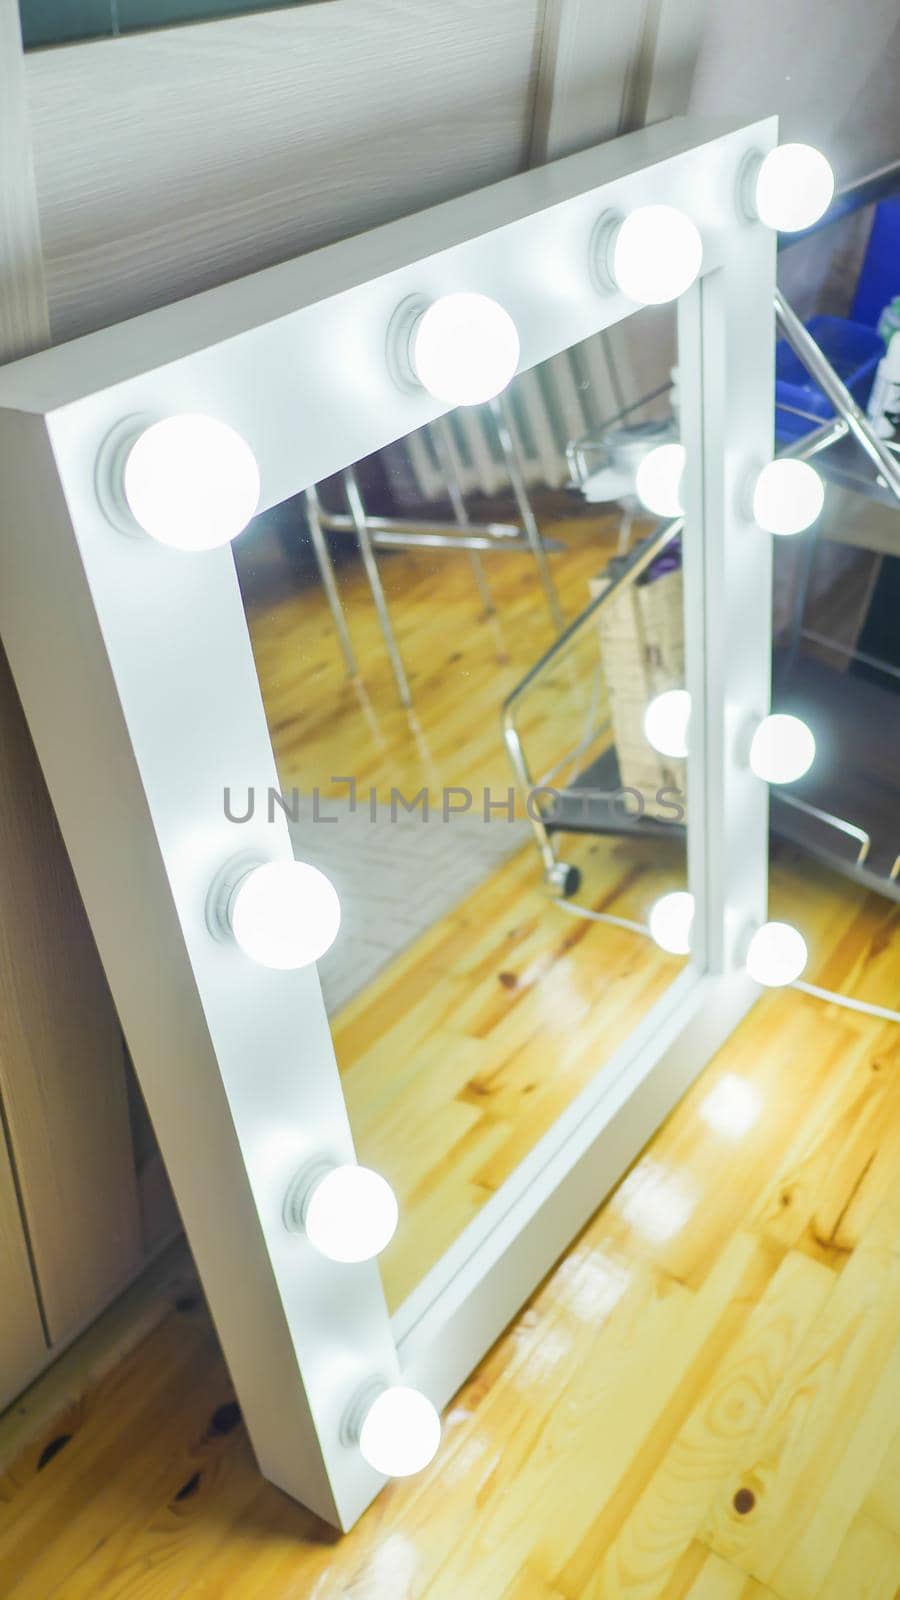 Four make-up mirrors stand in the room and are lit. Video shooting in motion